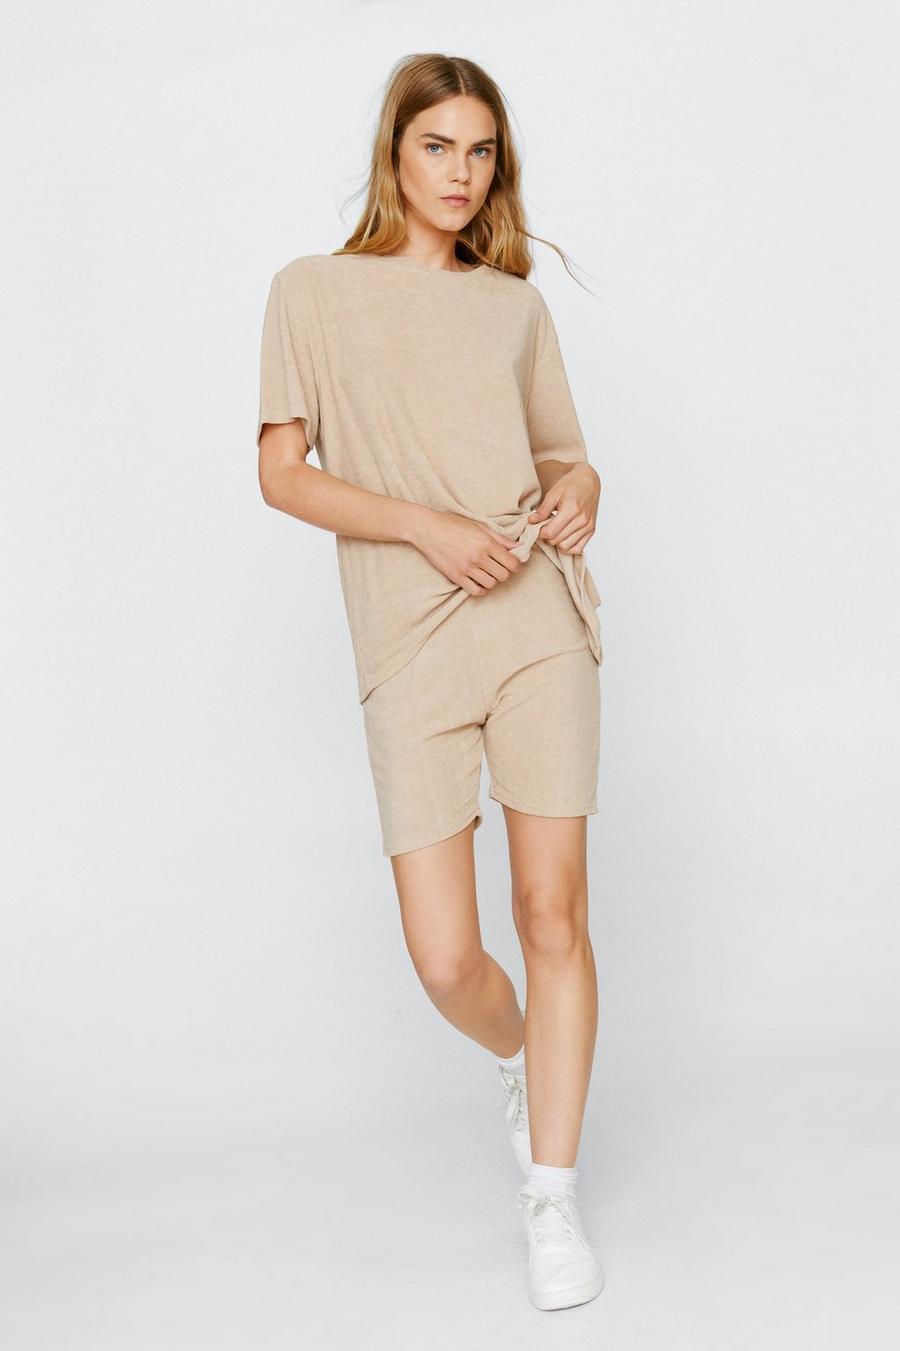 Towelling Crew Neck Top and Shorts Two Piece Set